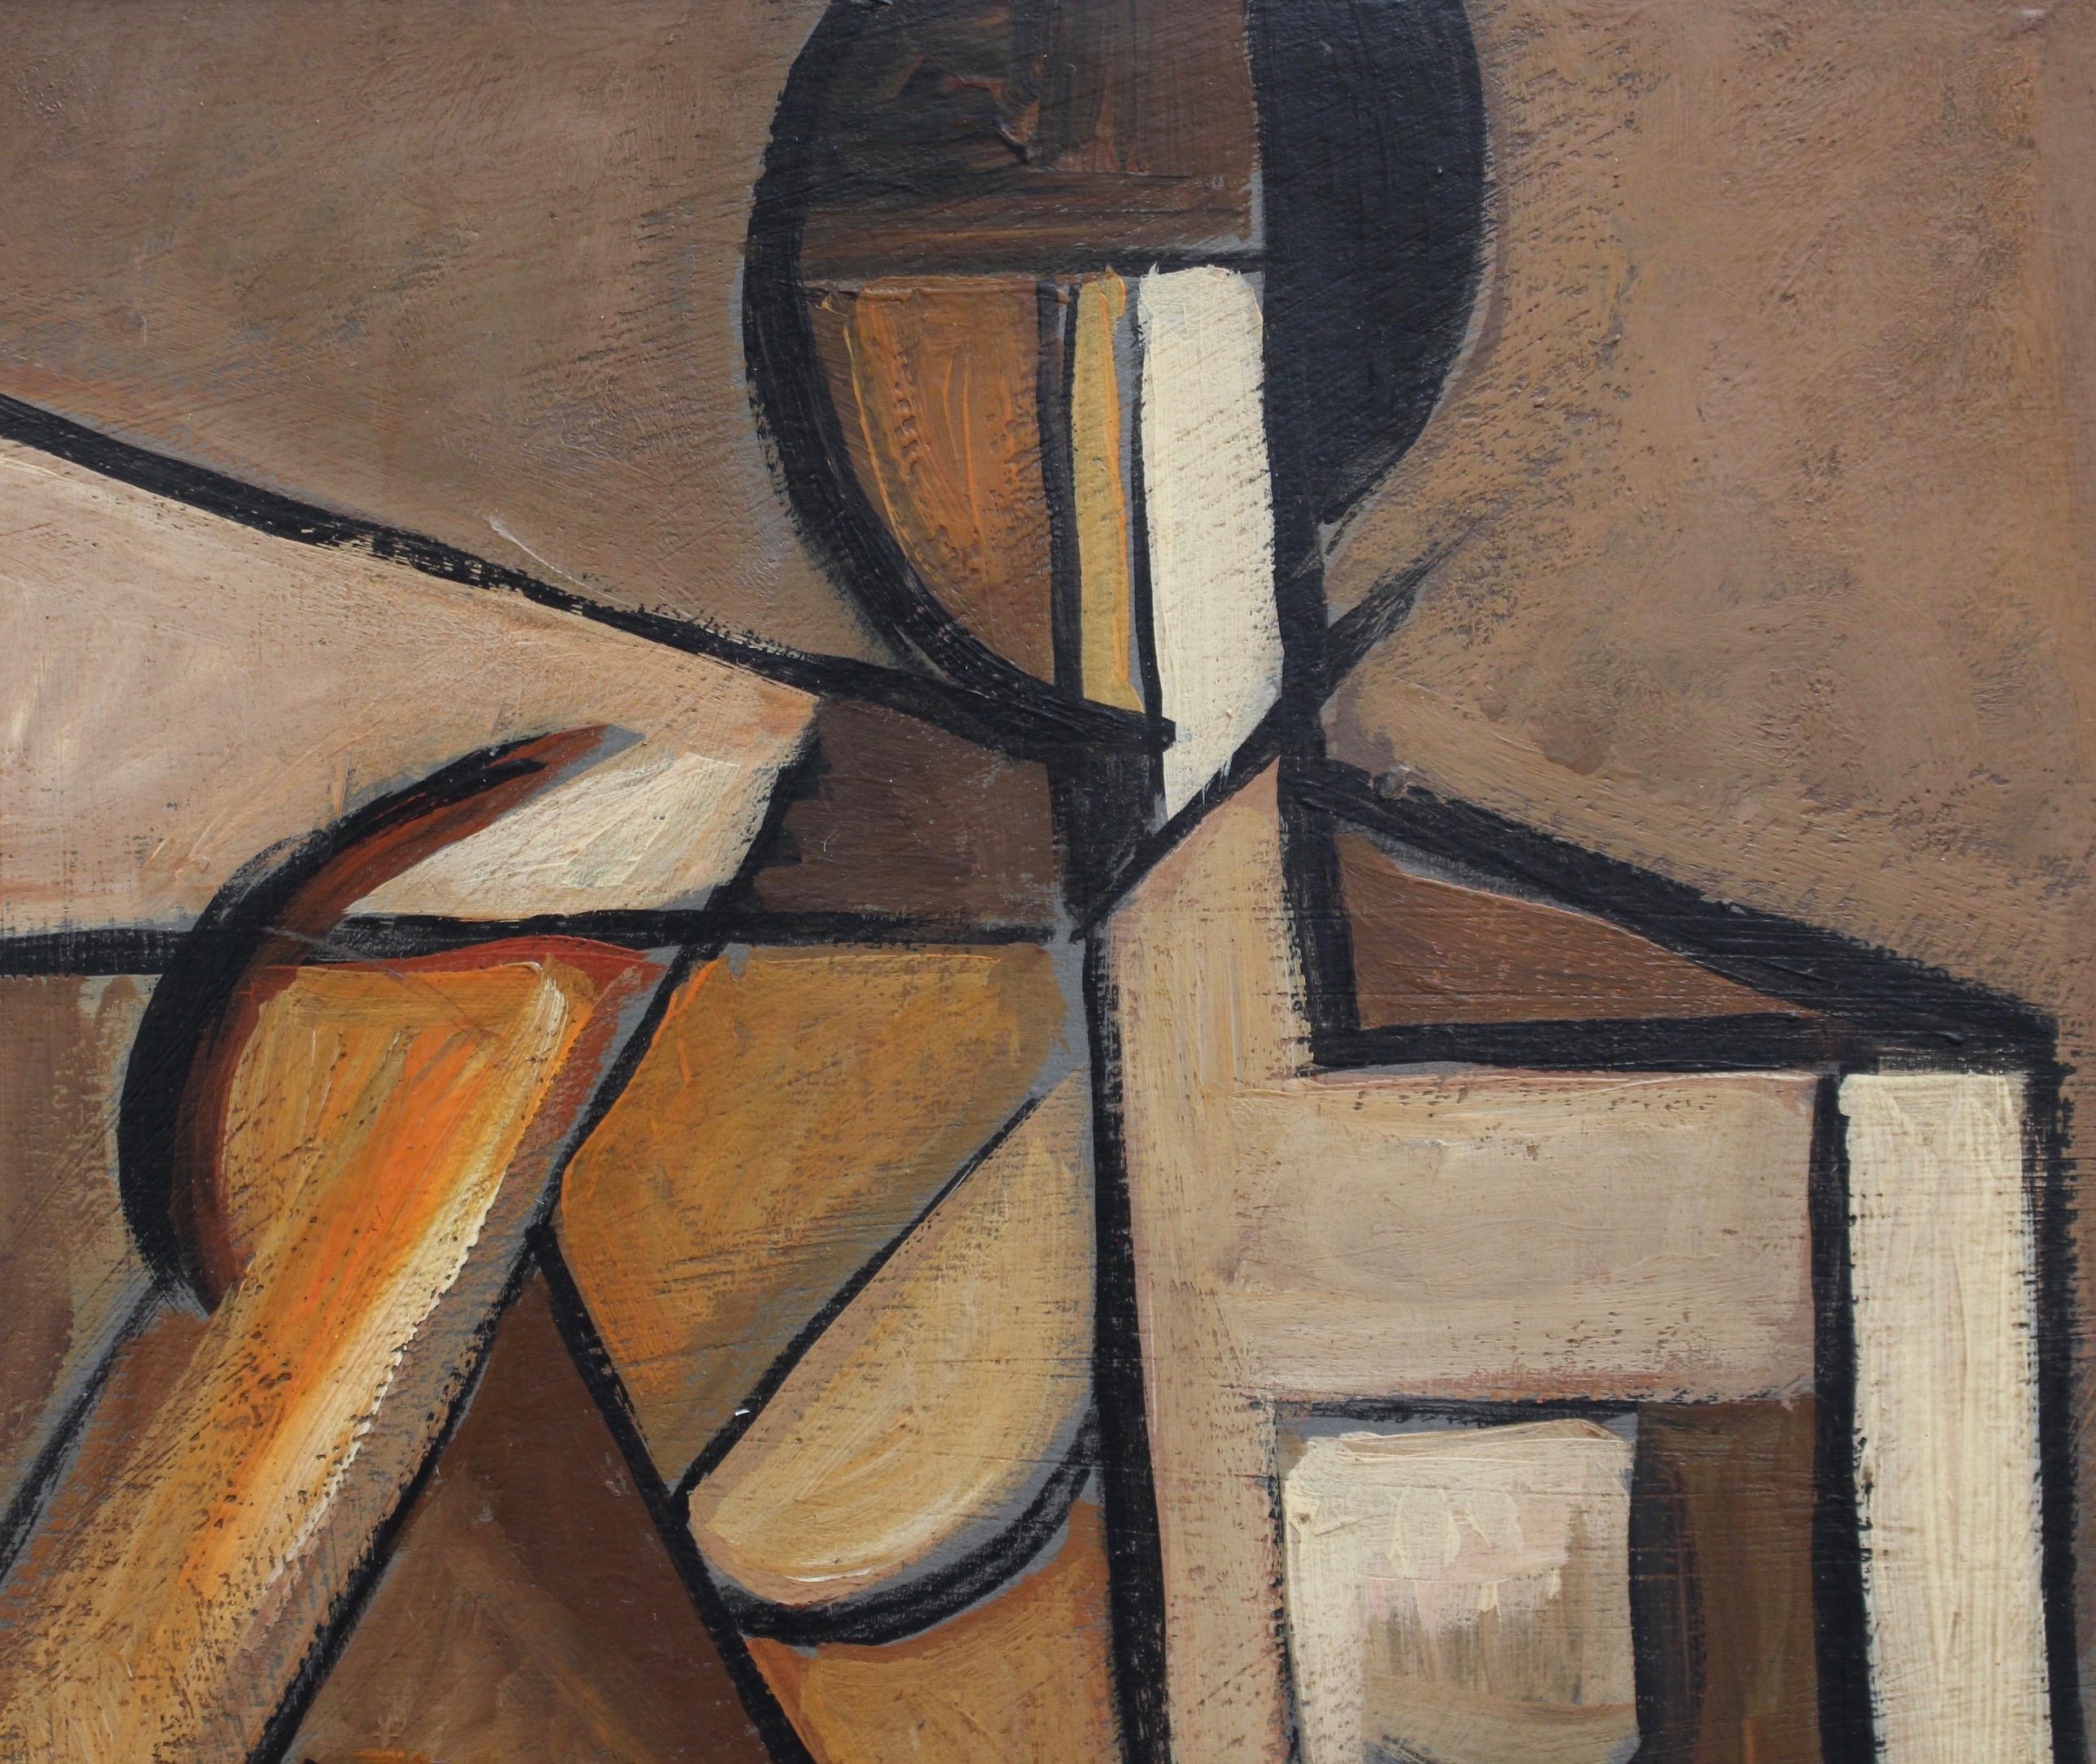 'Abstract Nude in Mahogany', oil on board, by P. Charon, French School (circa 1950s - 60s). This work of art reminds one of the invitingly rich brown and dark red wood of mahogany. The subject's warm tones and depth of colour and burnt brown